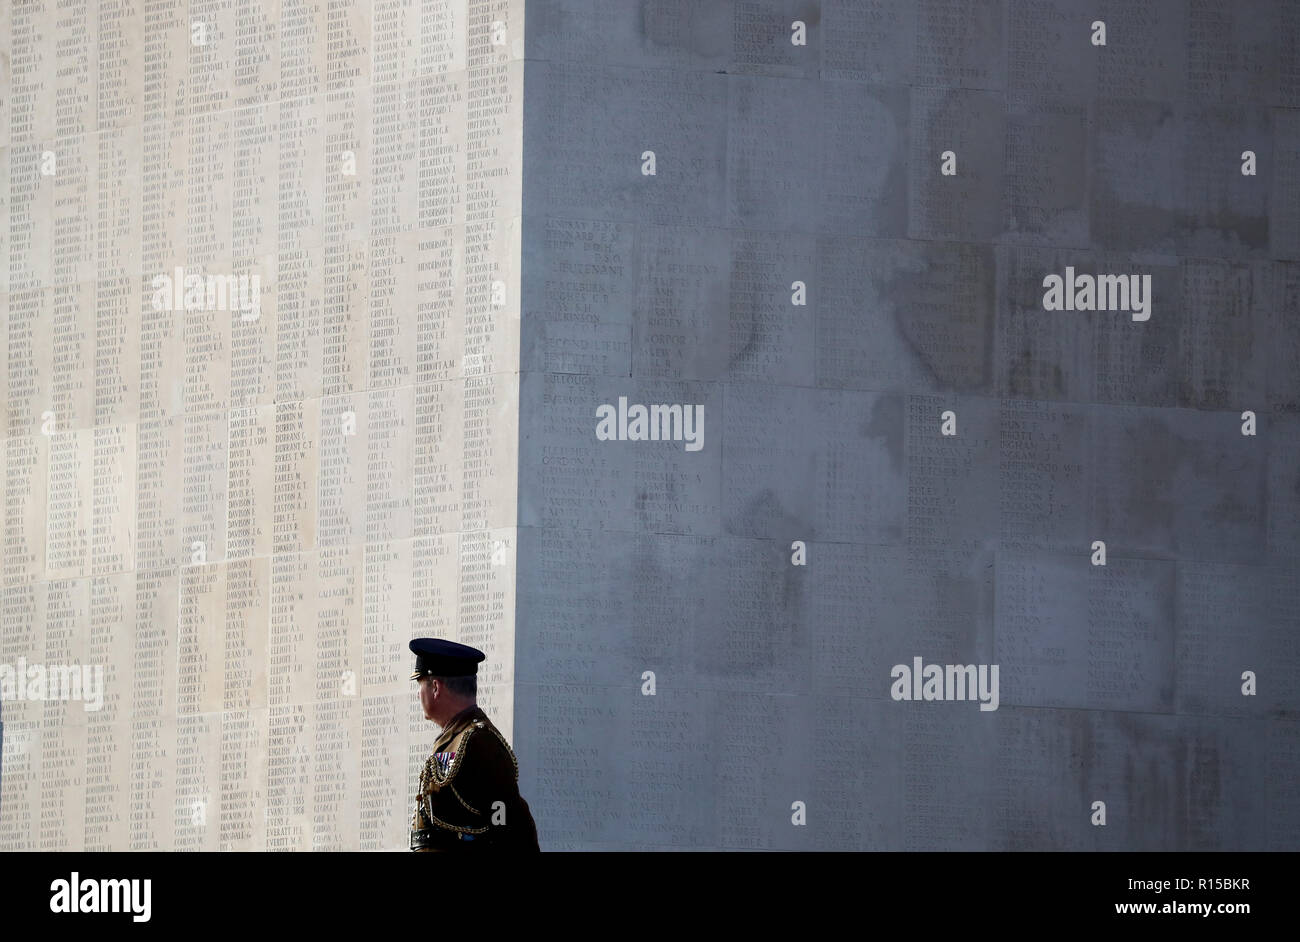 A soldier stands besides the wall of names, memorialising those who have no known grave, during a wreath laying ceremony at the Thiepval Memorial in Authuille, France. Stock Photo